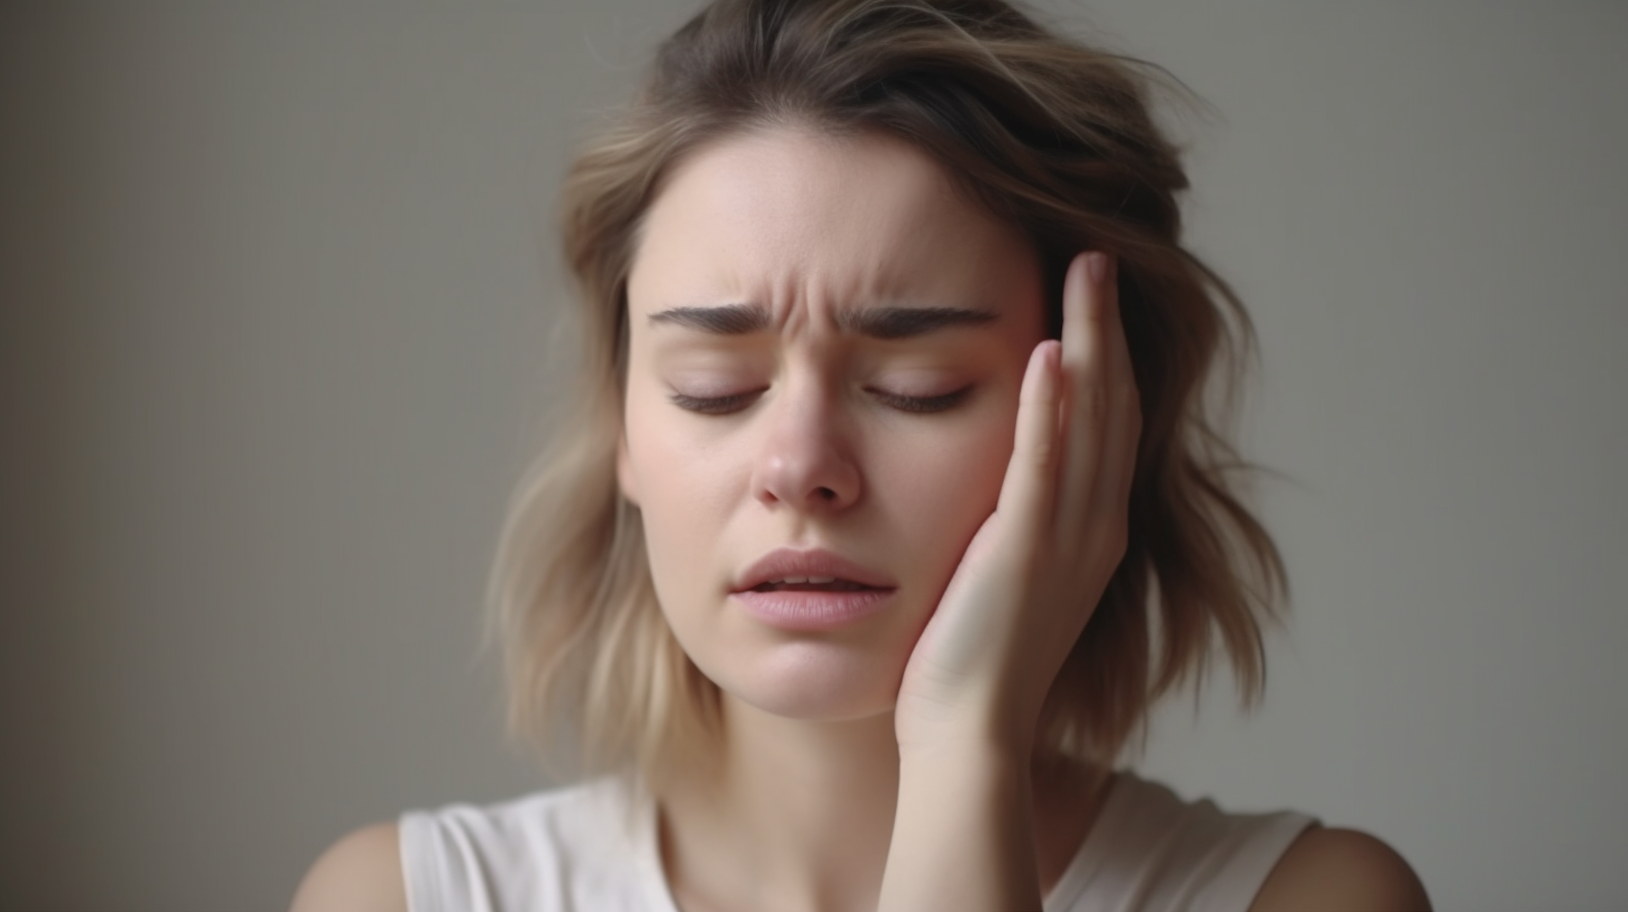 Woman experiencing jaw pain and headaches, finding relief through chiropractic care